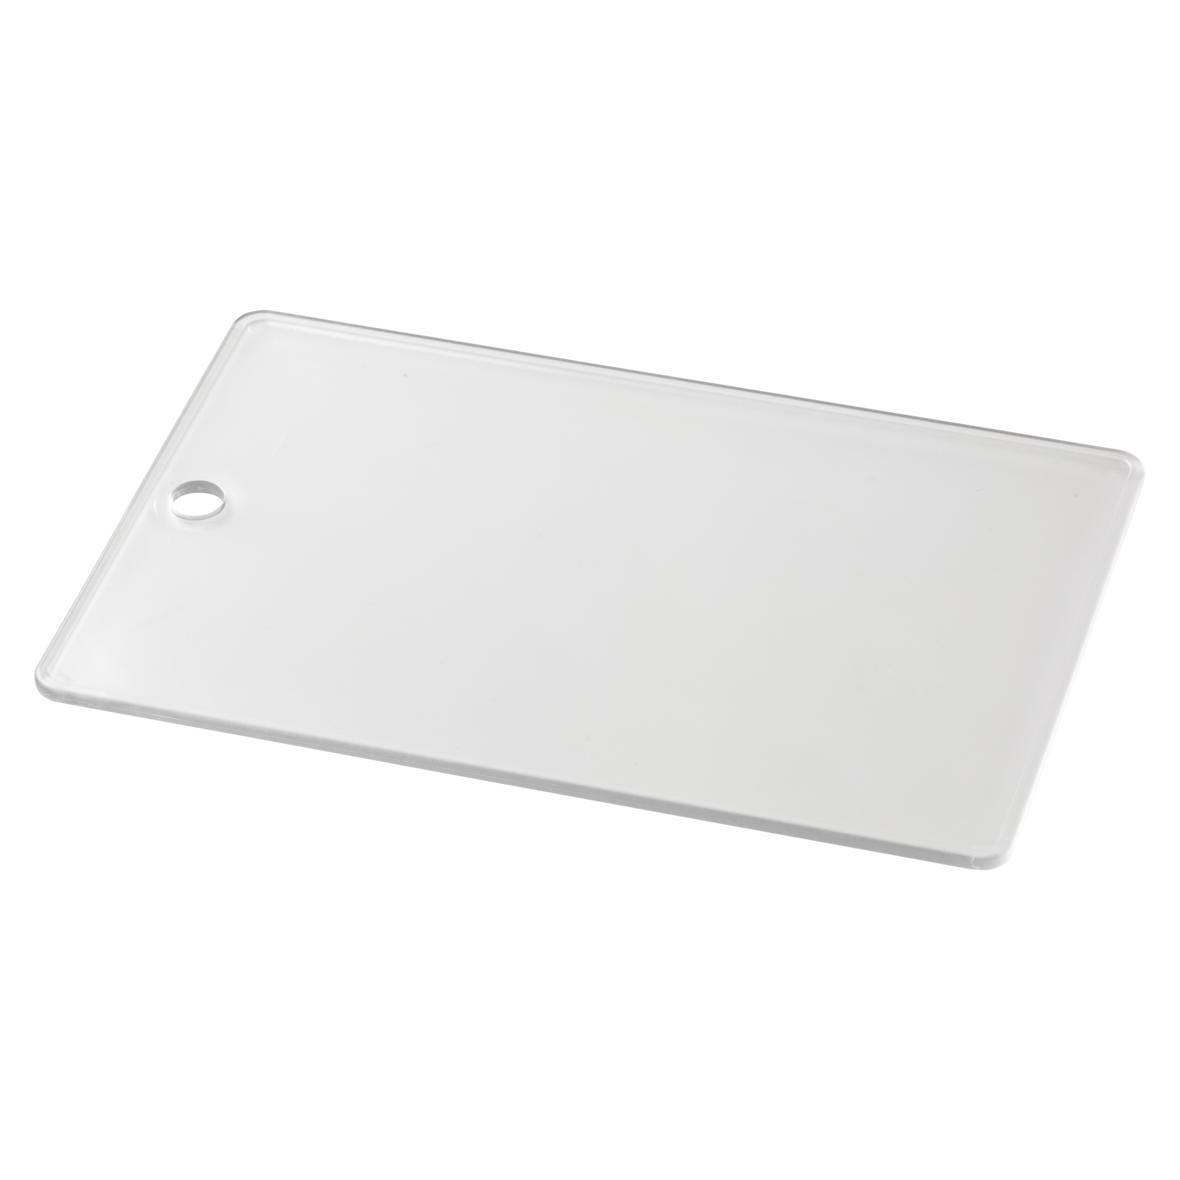 Practical Hanging Chopping Board - Atherstone